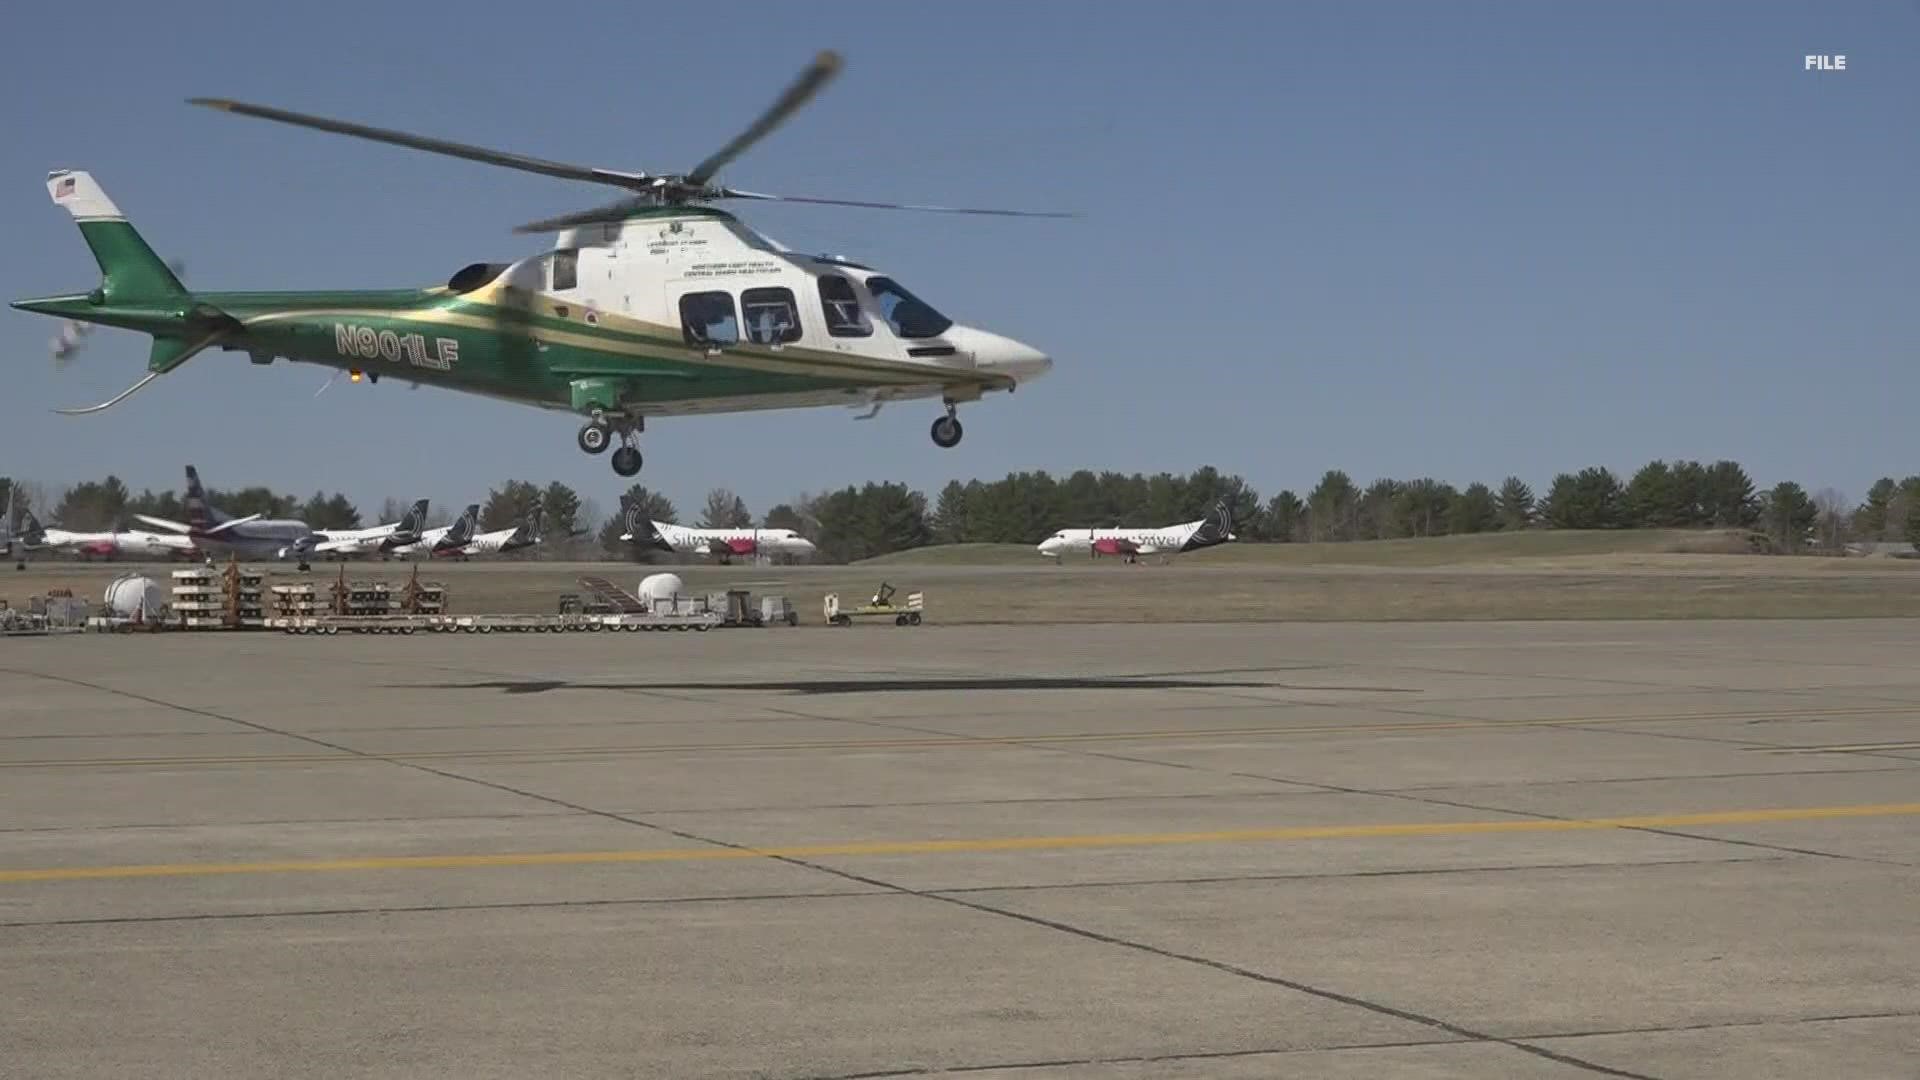 The Cross for LifeFlight event takes place during the entire month of August.